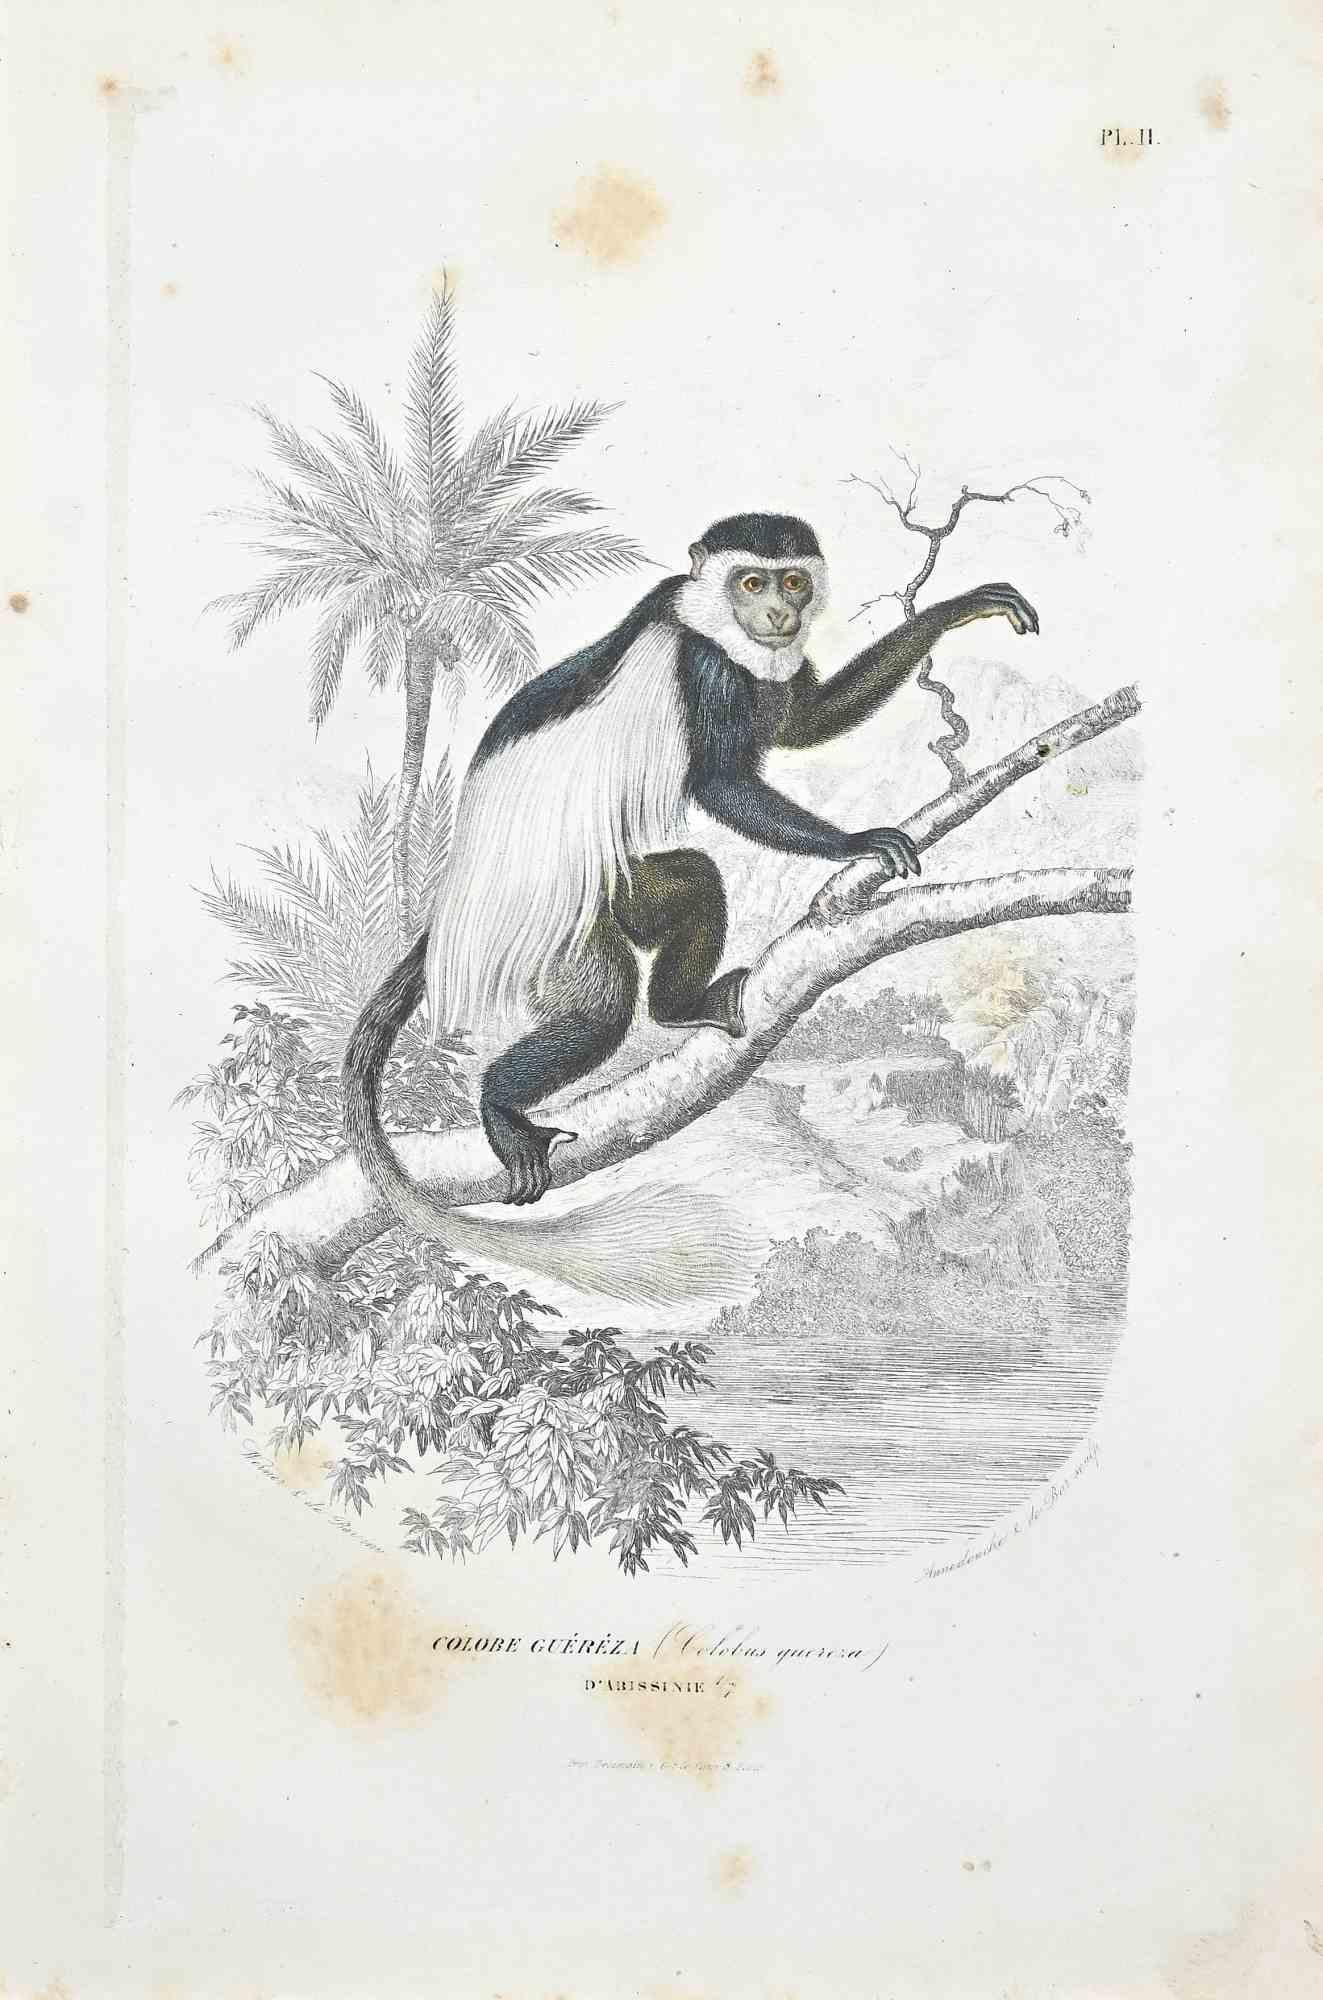 Mantled Guereza is an original lithograph on ivory-colored paper, realized by Paul Gervais (1816-1879). The artwork is from The Series of "Les Trois Règnes de la Nature", and was published in 1854.

Good conditions except for some foxings.

Titled